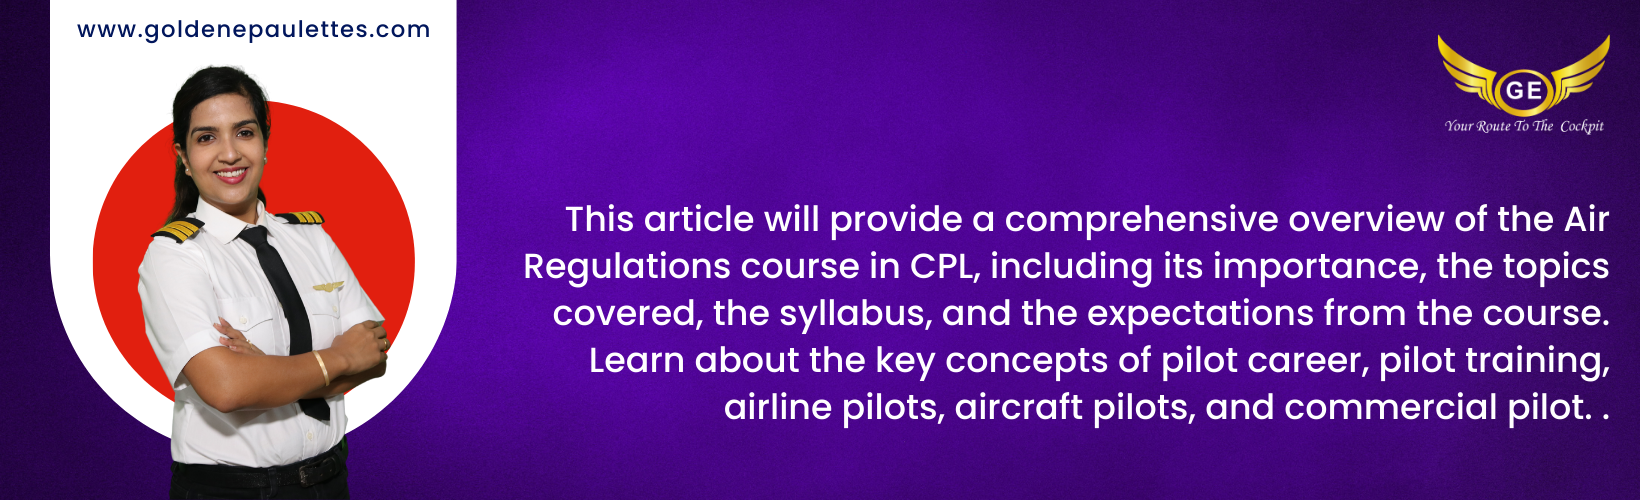 Introduction to Air Regulations Course in Commercial Pilot License (CPL)